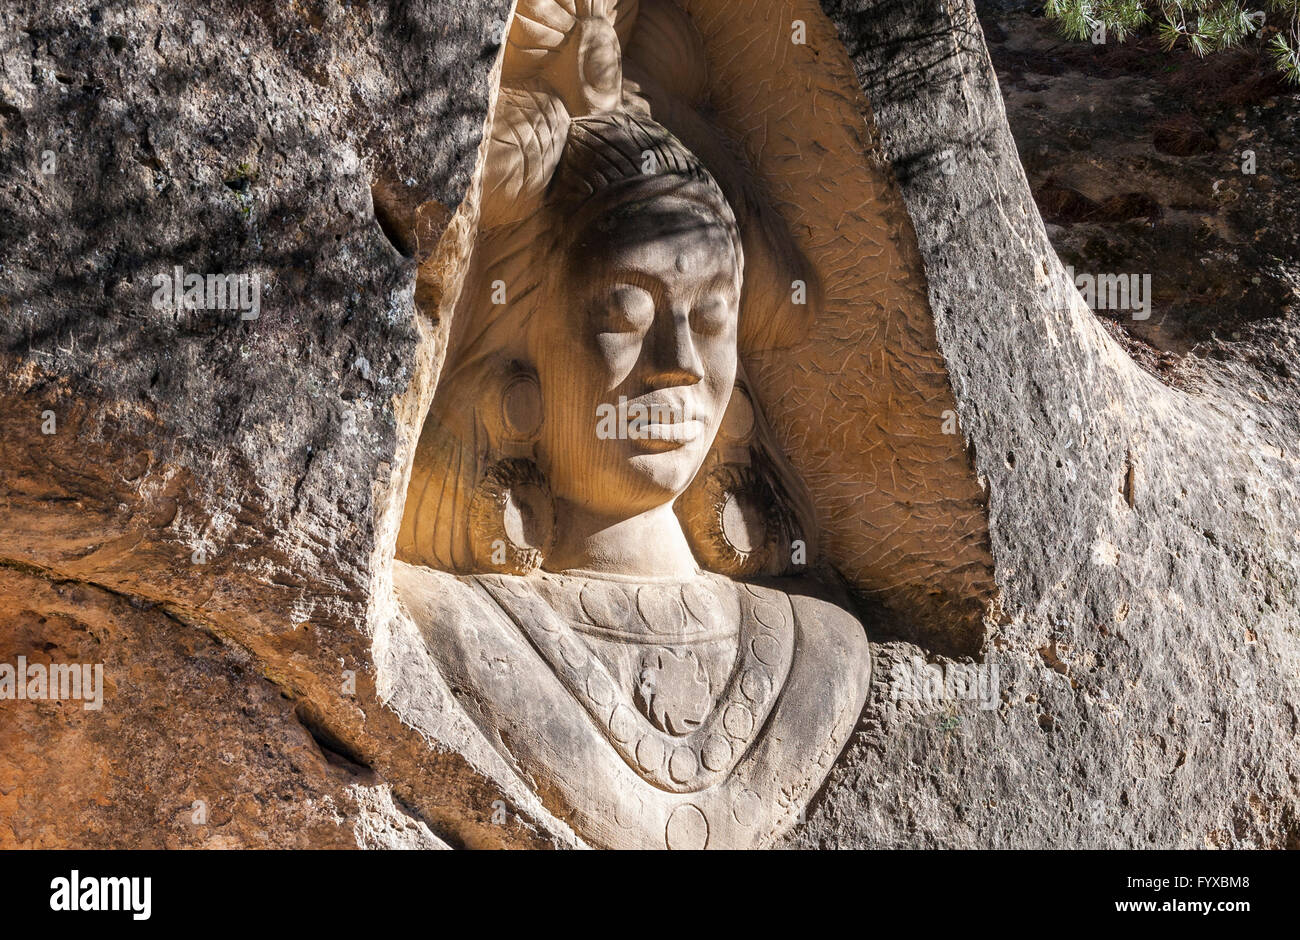 Sculptures carved on sandstones in the Ruta de las Caras, Route of the Faces Stock Photo